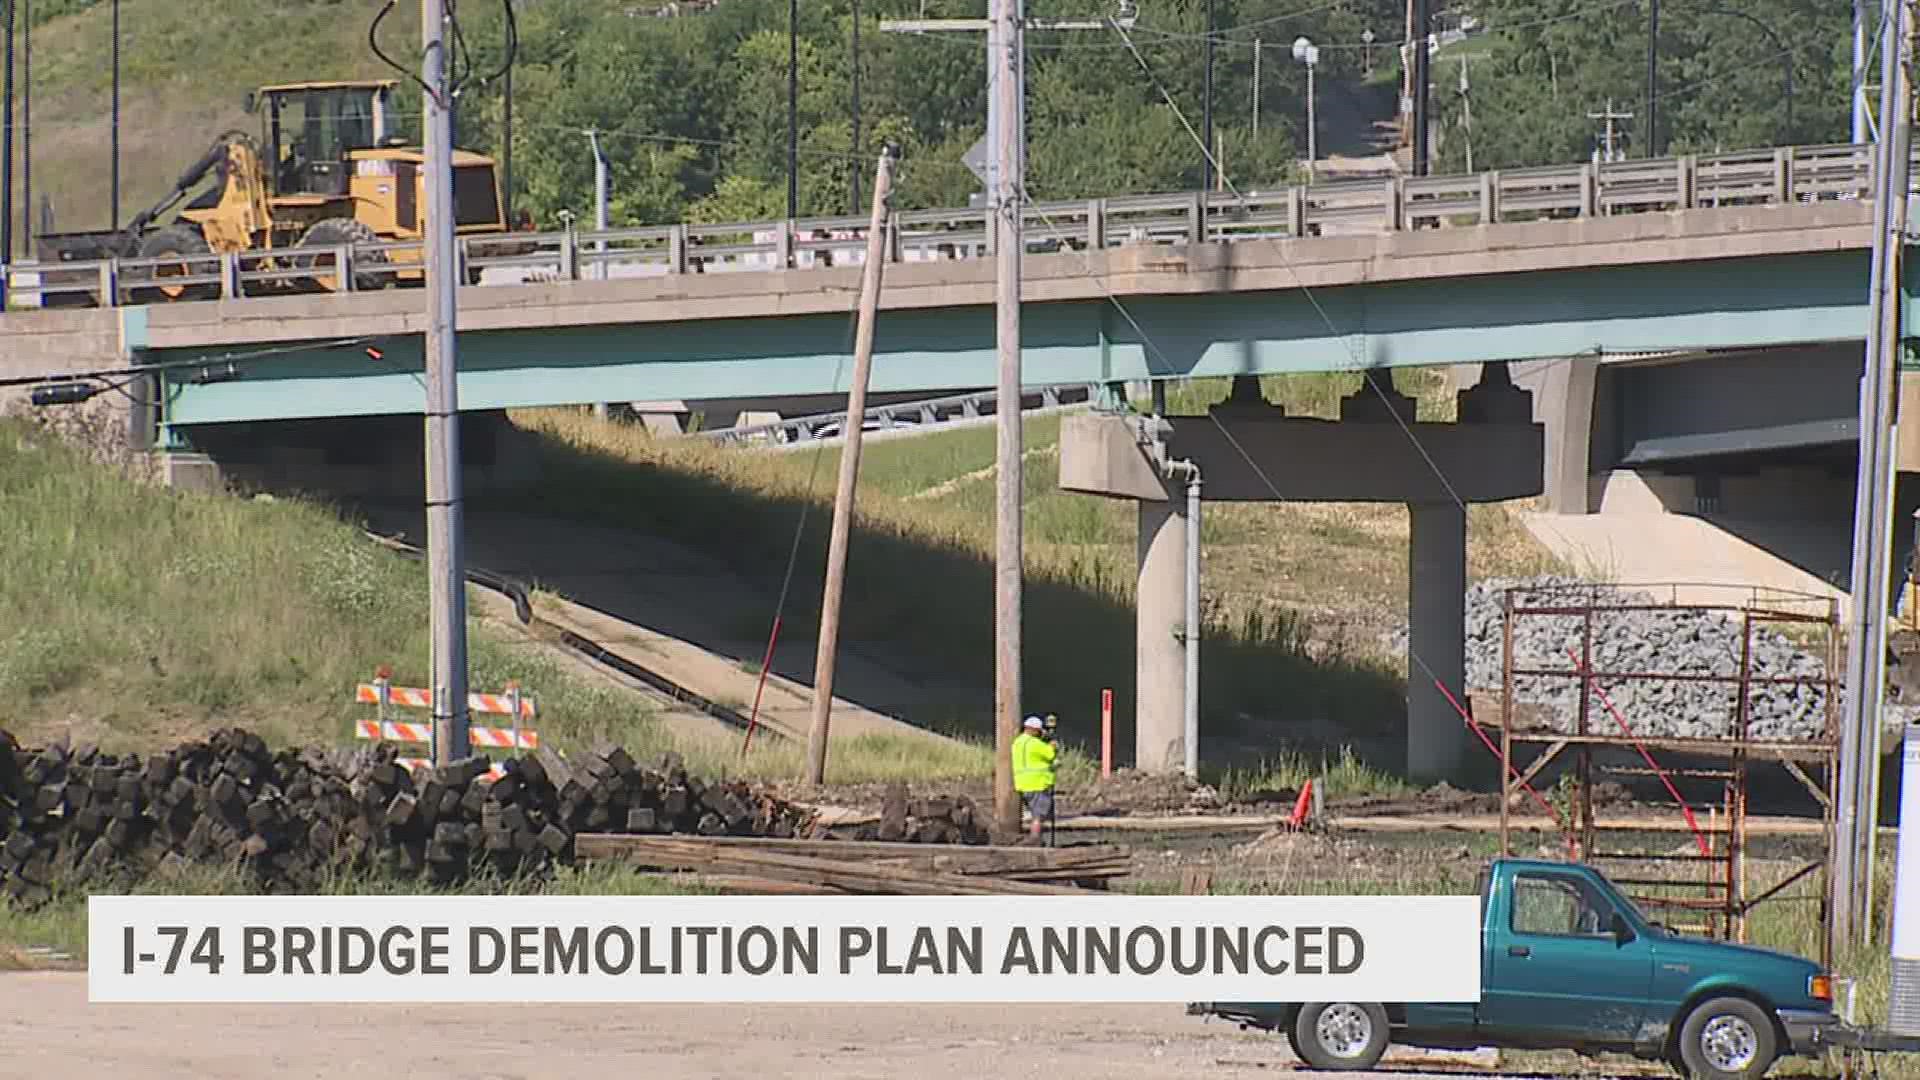 The old I-74 suspension bridge is slated to be fully removed by mid-2024. Initially planned as an implosion, it will now be dismantled piece by piece.